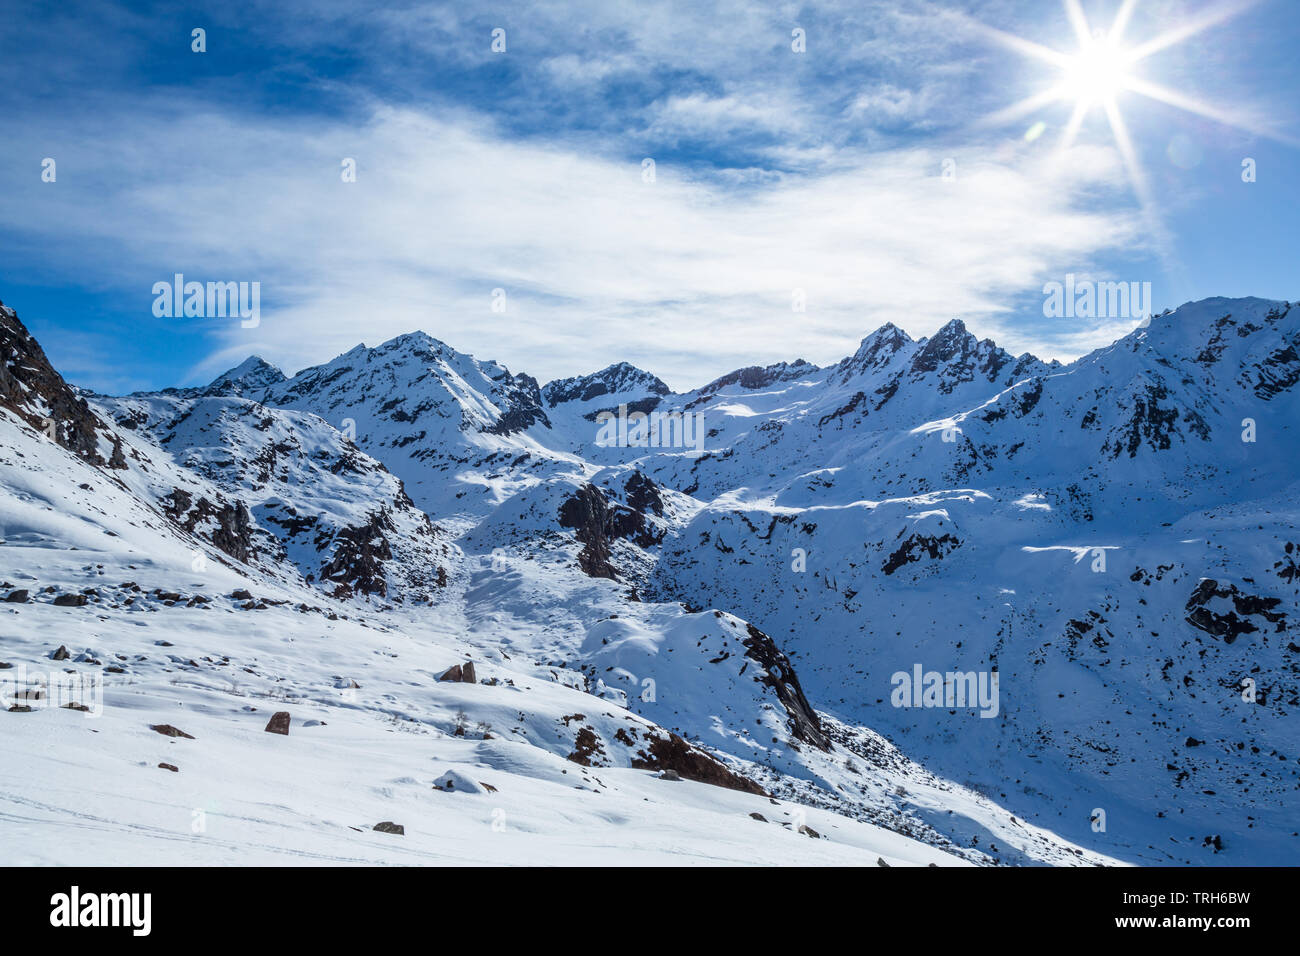 Snow covered mountains in the Talkeetna Mountain Range of Alaska. Snow is melting under a bright spring sun in April near Hatcher Pass Recreation Area Stock Photo